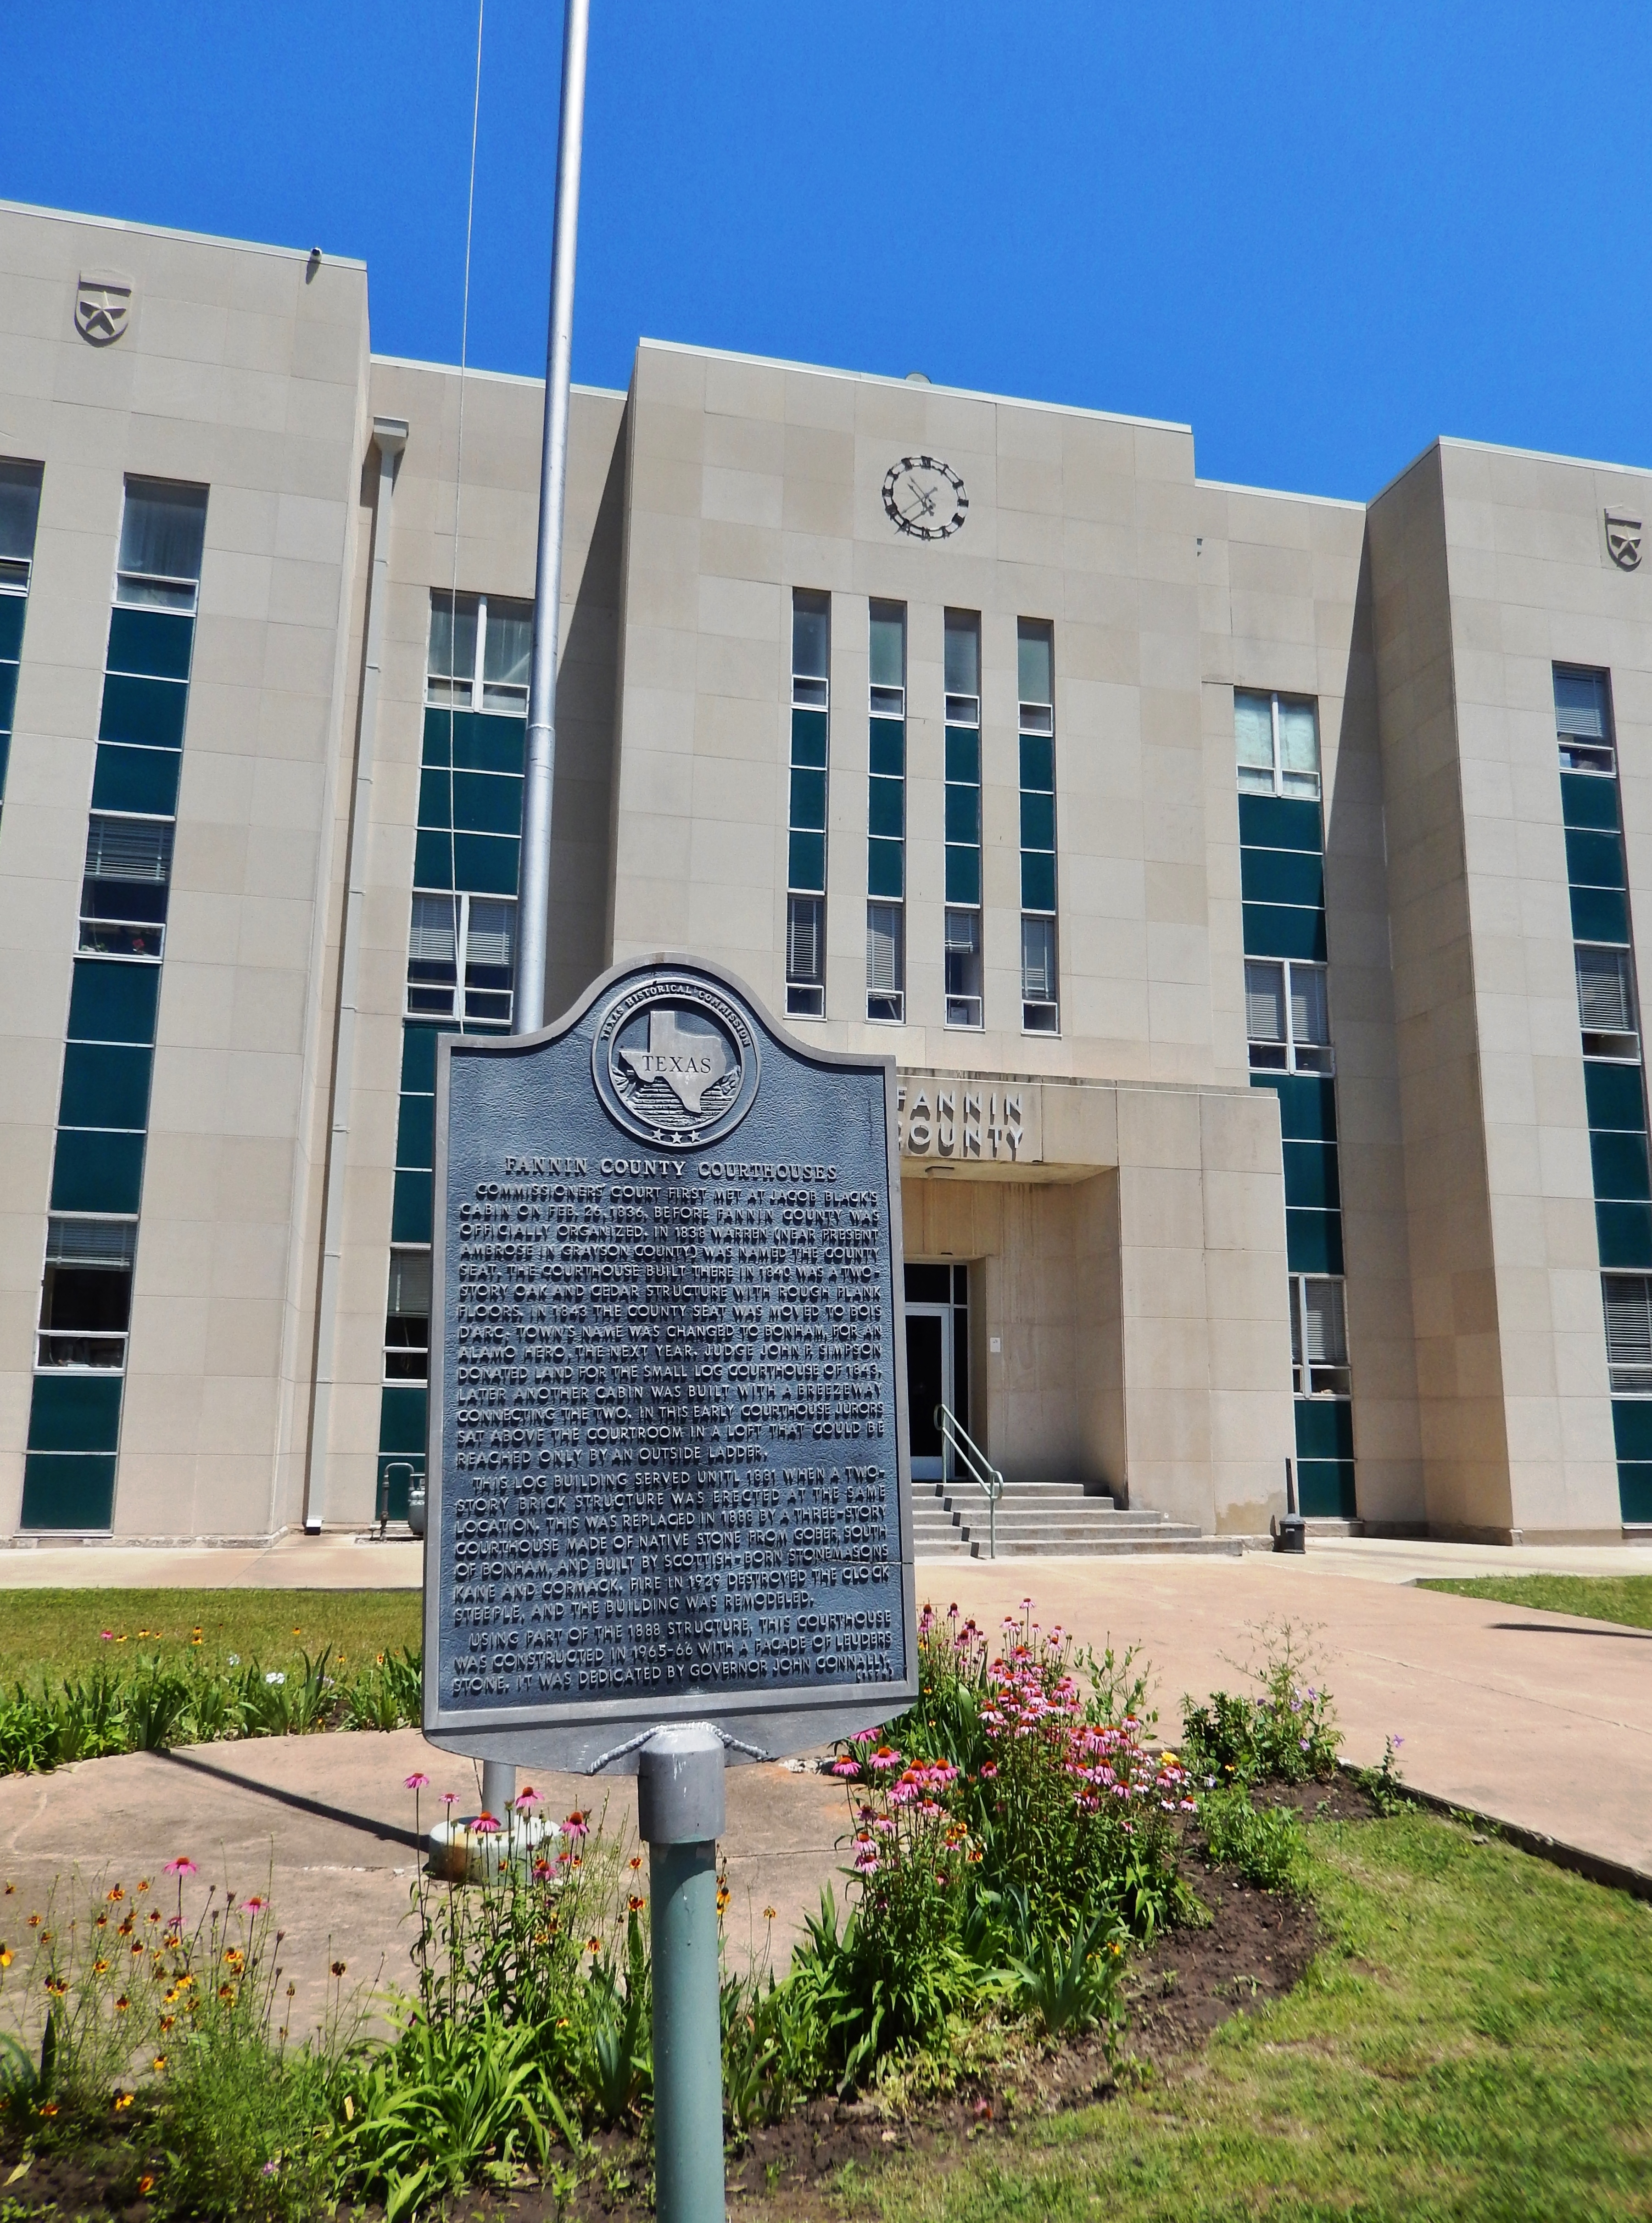 Fannin County Courthouses Marker (<i>tall view; Fannin County Courthouse entrance in background</i>)